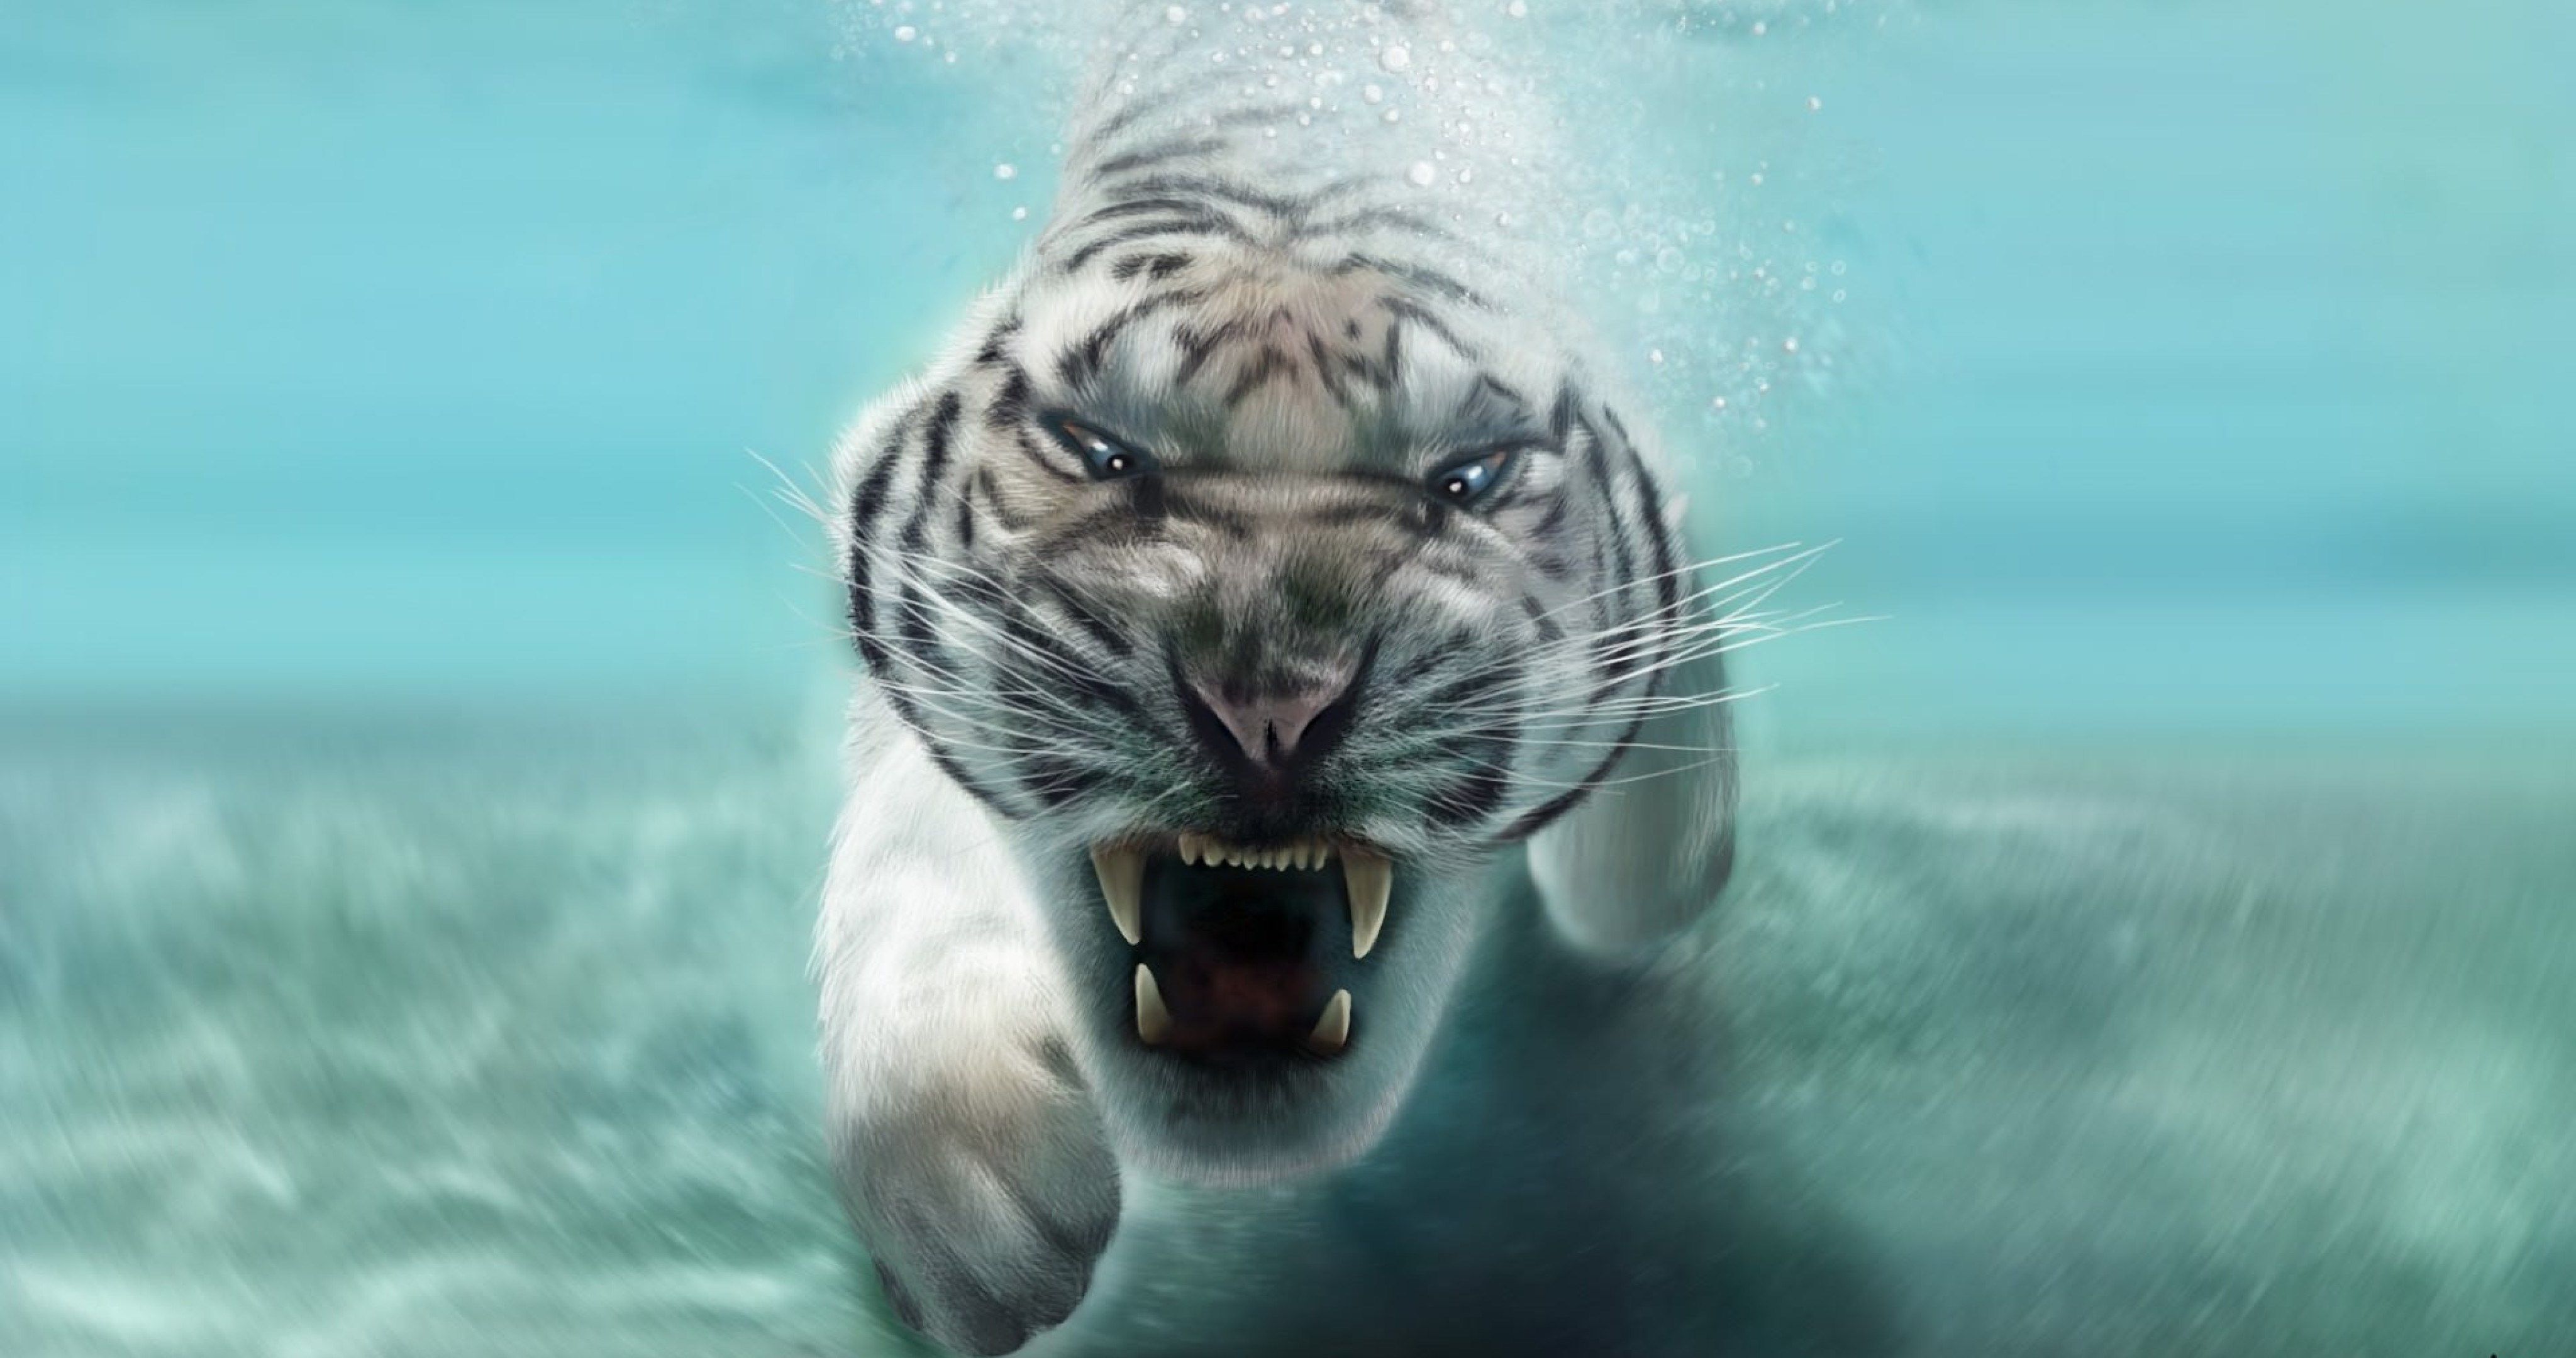 Ultra Hd Wallpapers 4k Tiger, Hd Wallpapers & backgrounds Download